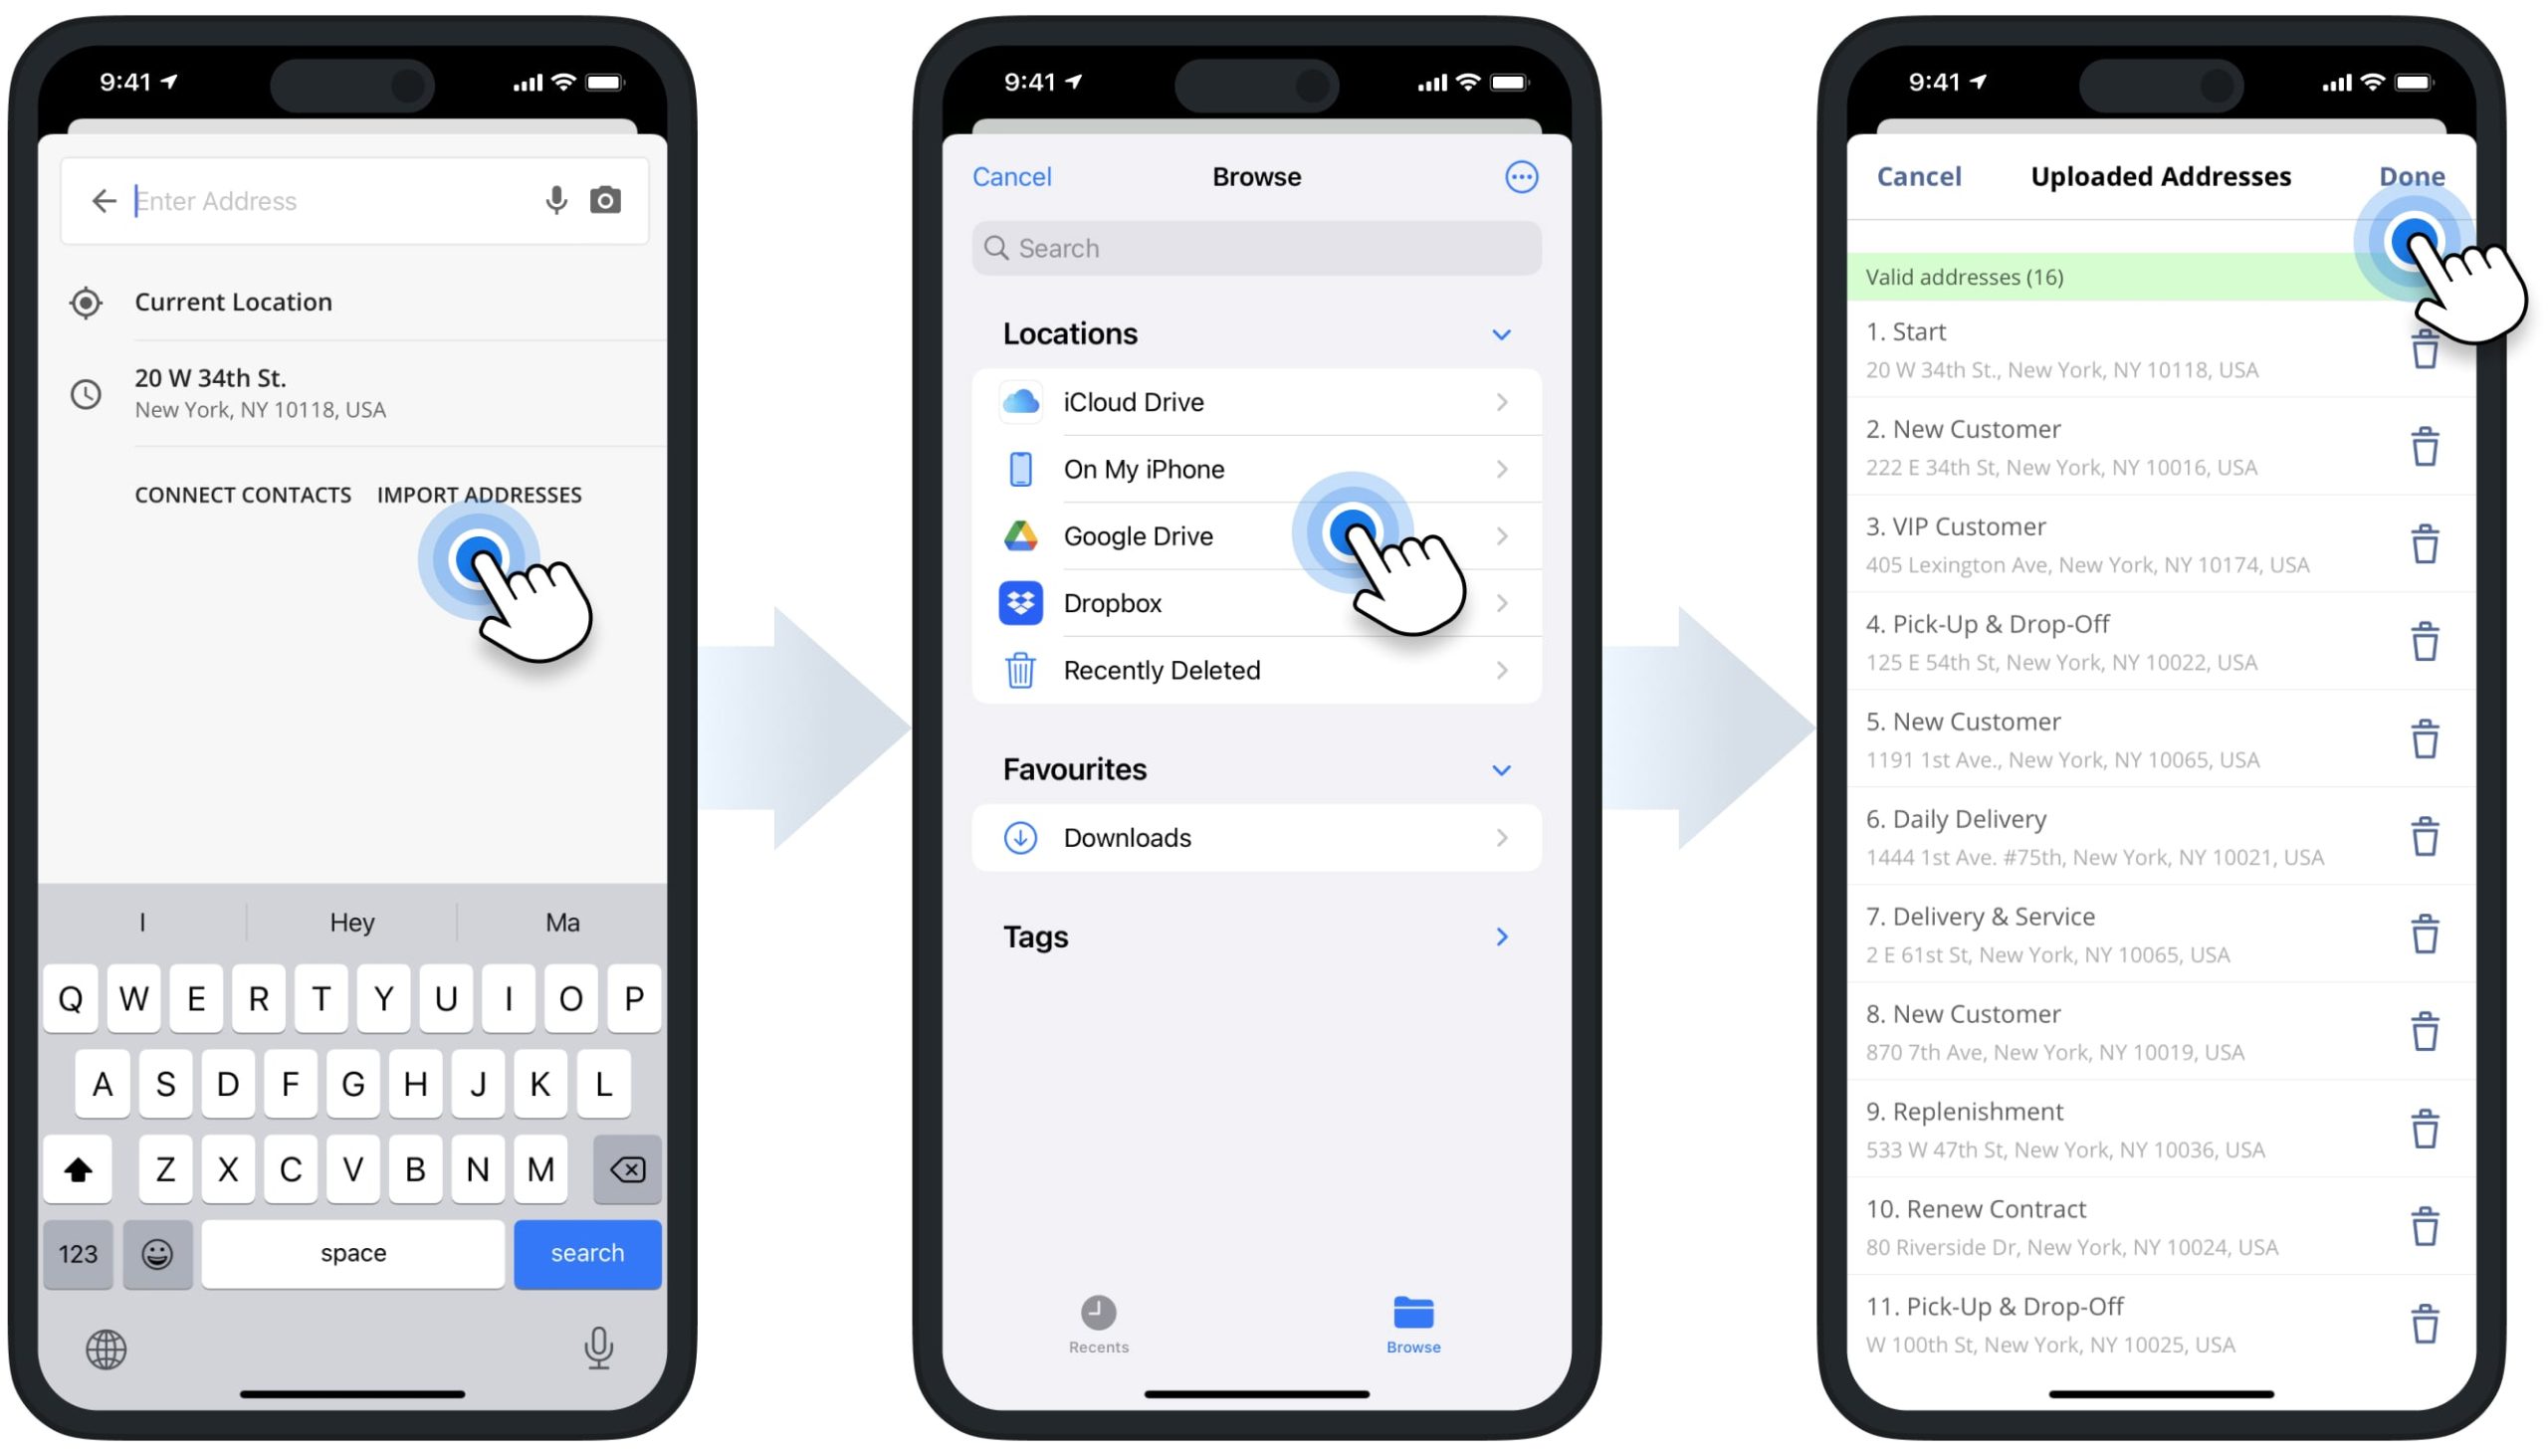 Import addresses from iCloud, Google Drive, Dropbox, and other cloud services and devices into the iPhone route planner app.